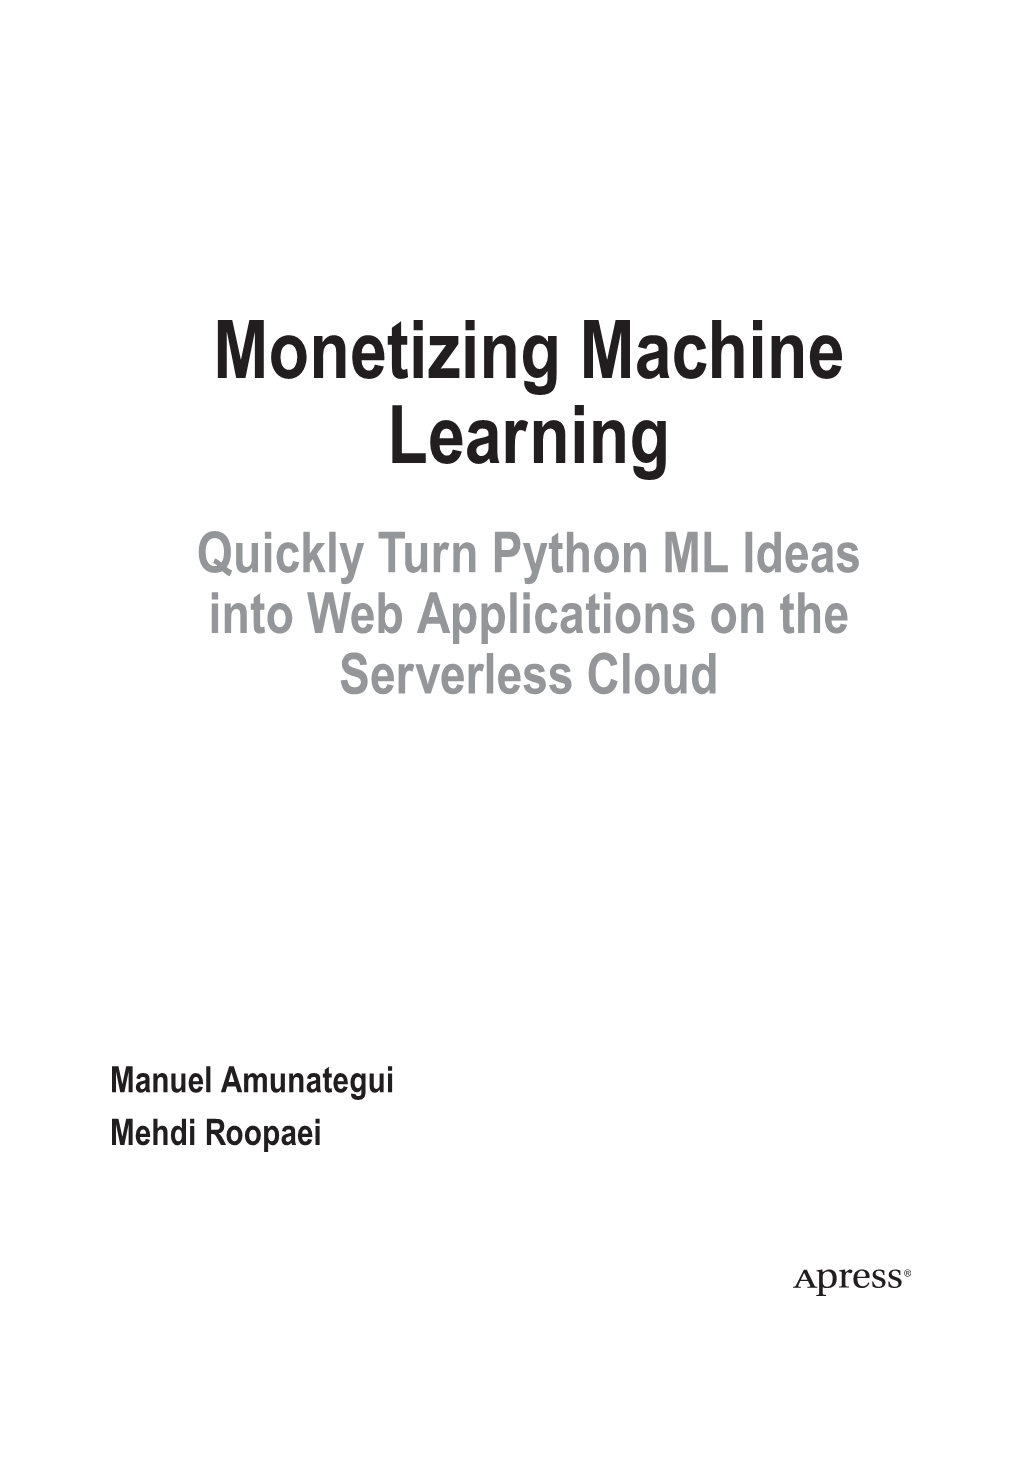 Monetizing Machine Learning Quickly Turn Python ML Ideas Into Web Applications on the Serverless Cloud